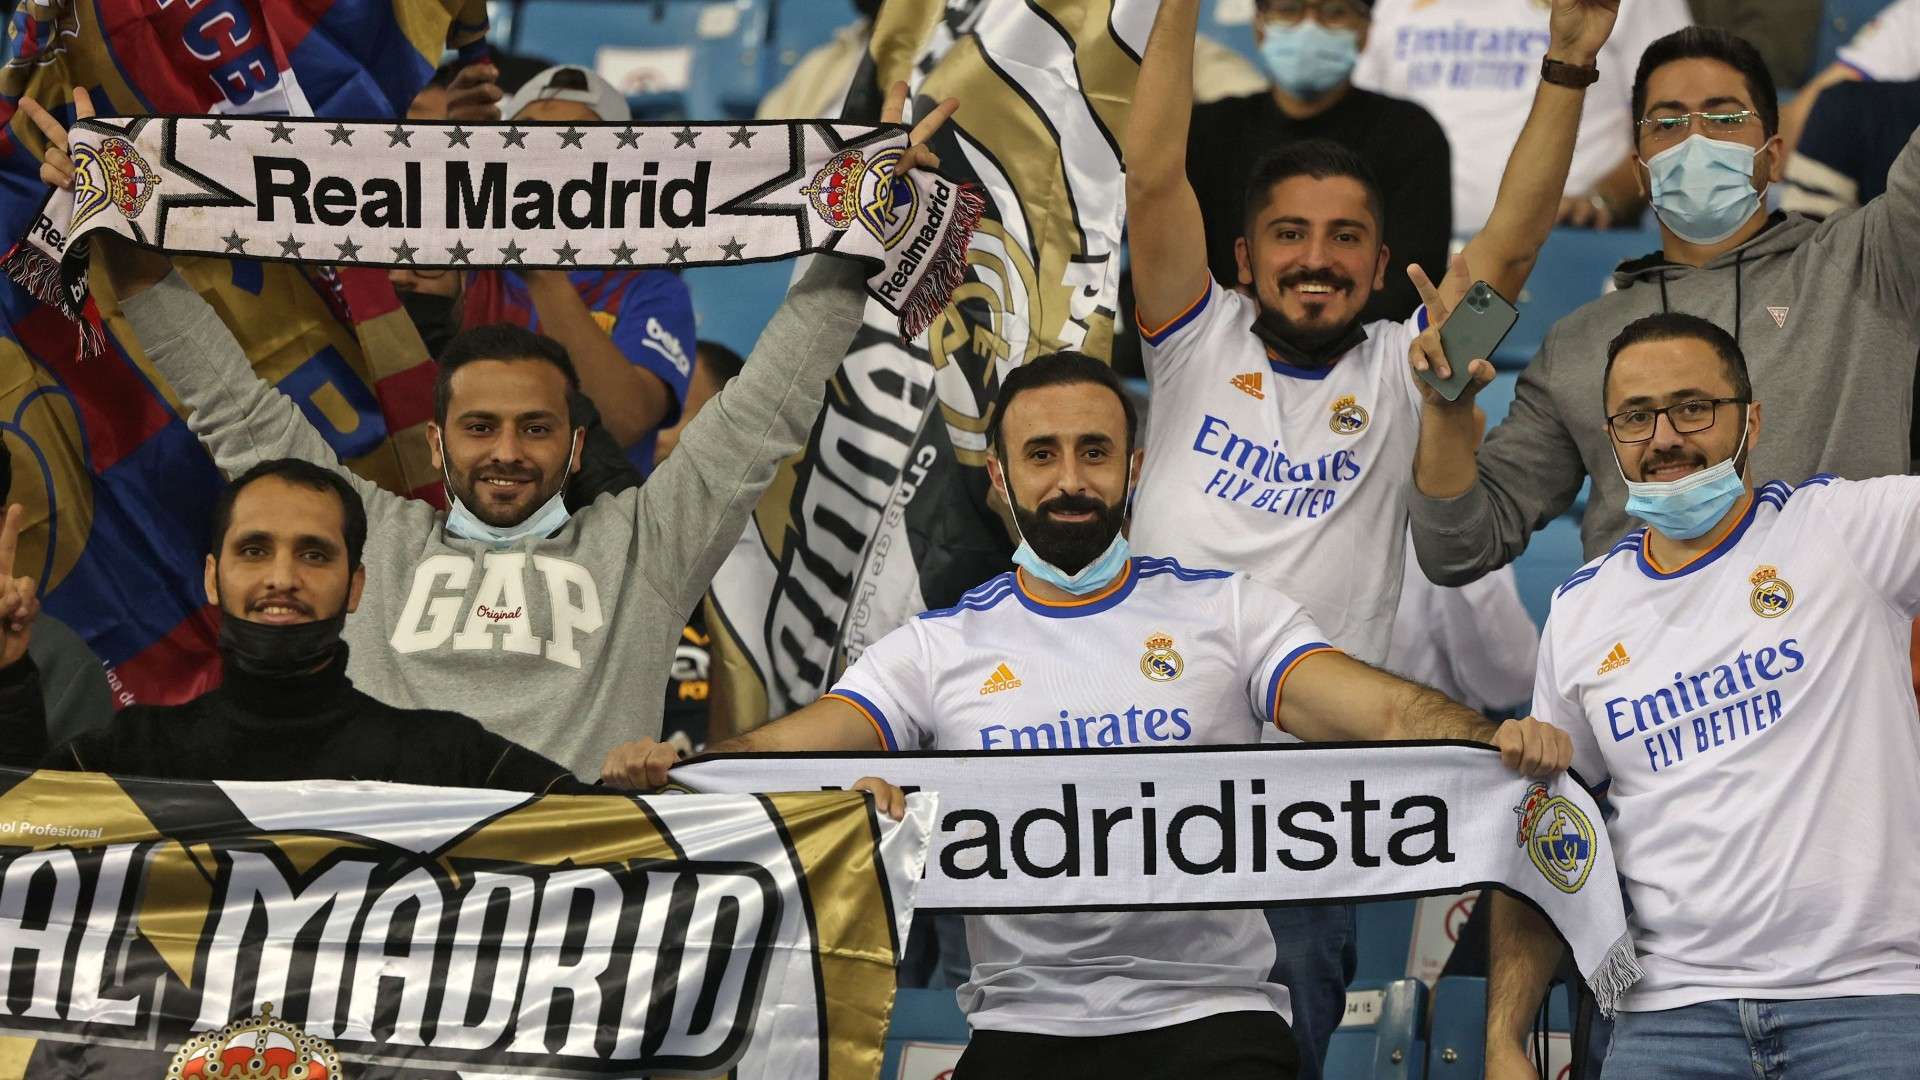 Real Madrid fans 2022